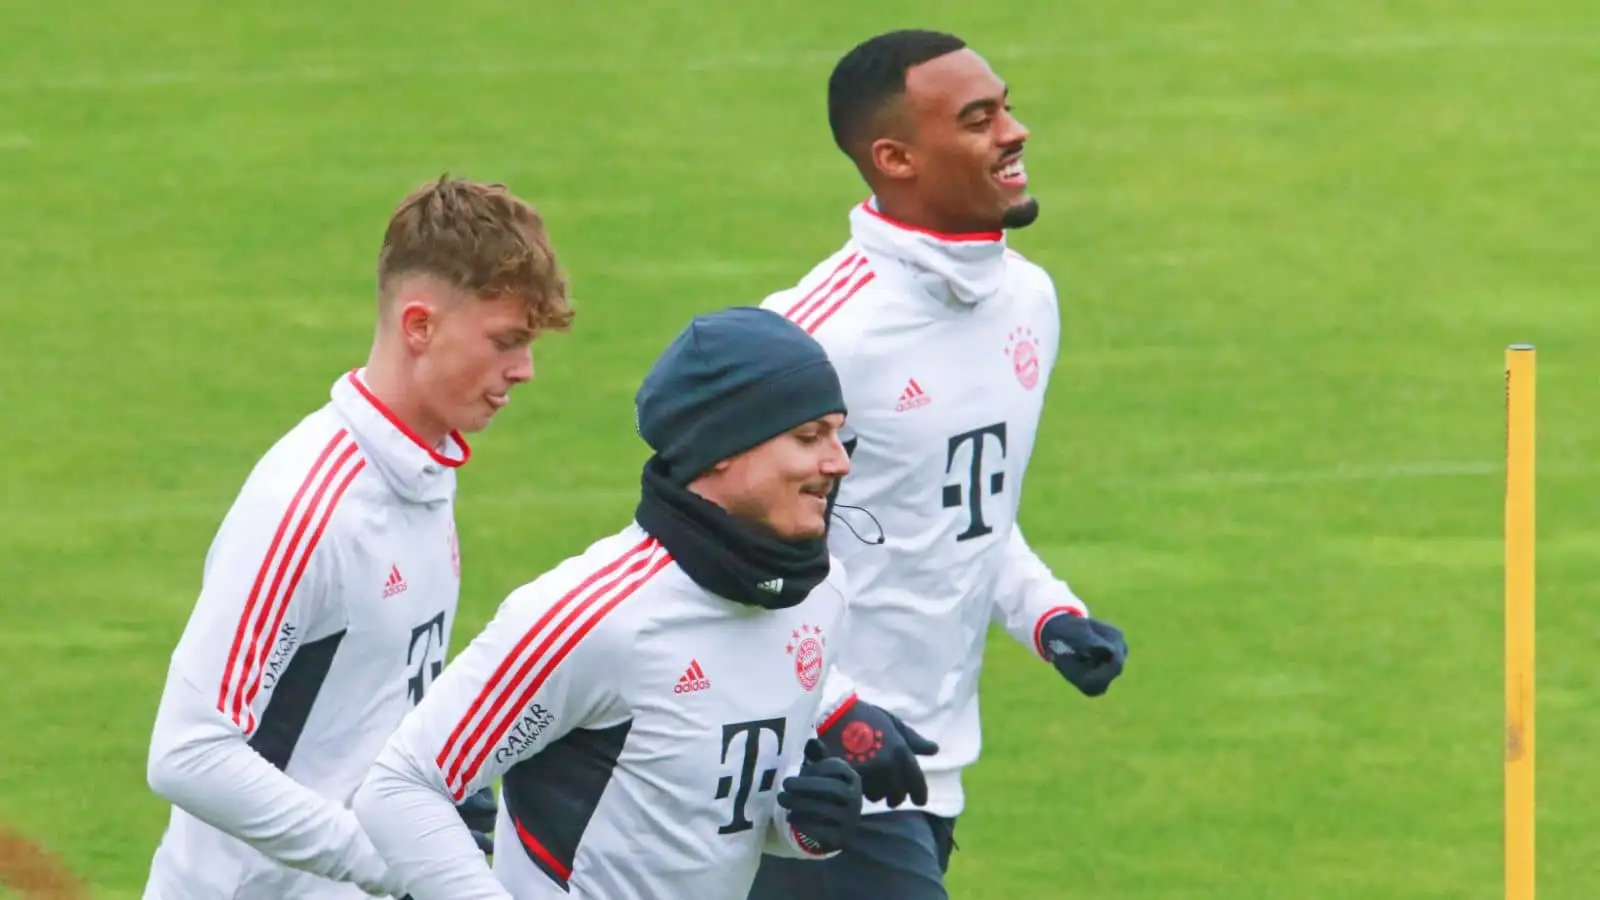 Paul Wanner, Marcel Sabitzer and Ryan Gravenberch Bayern Munich players during a training session